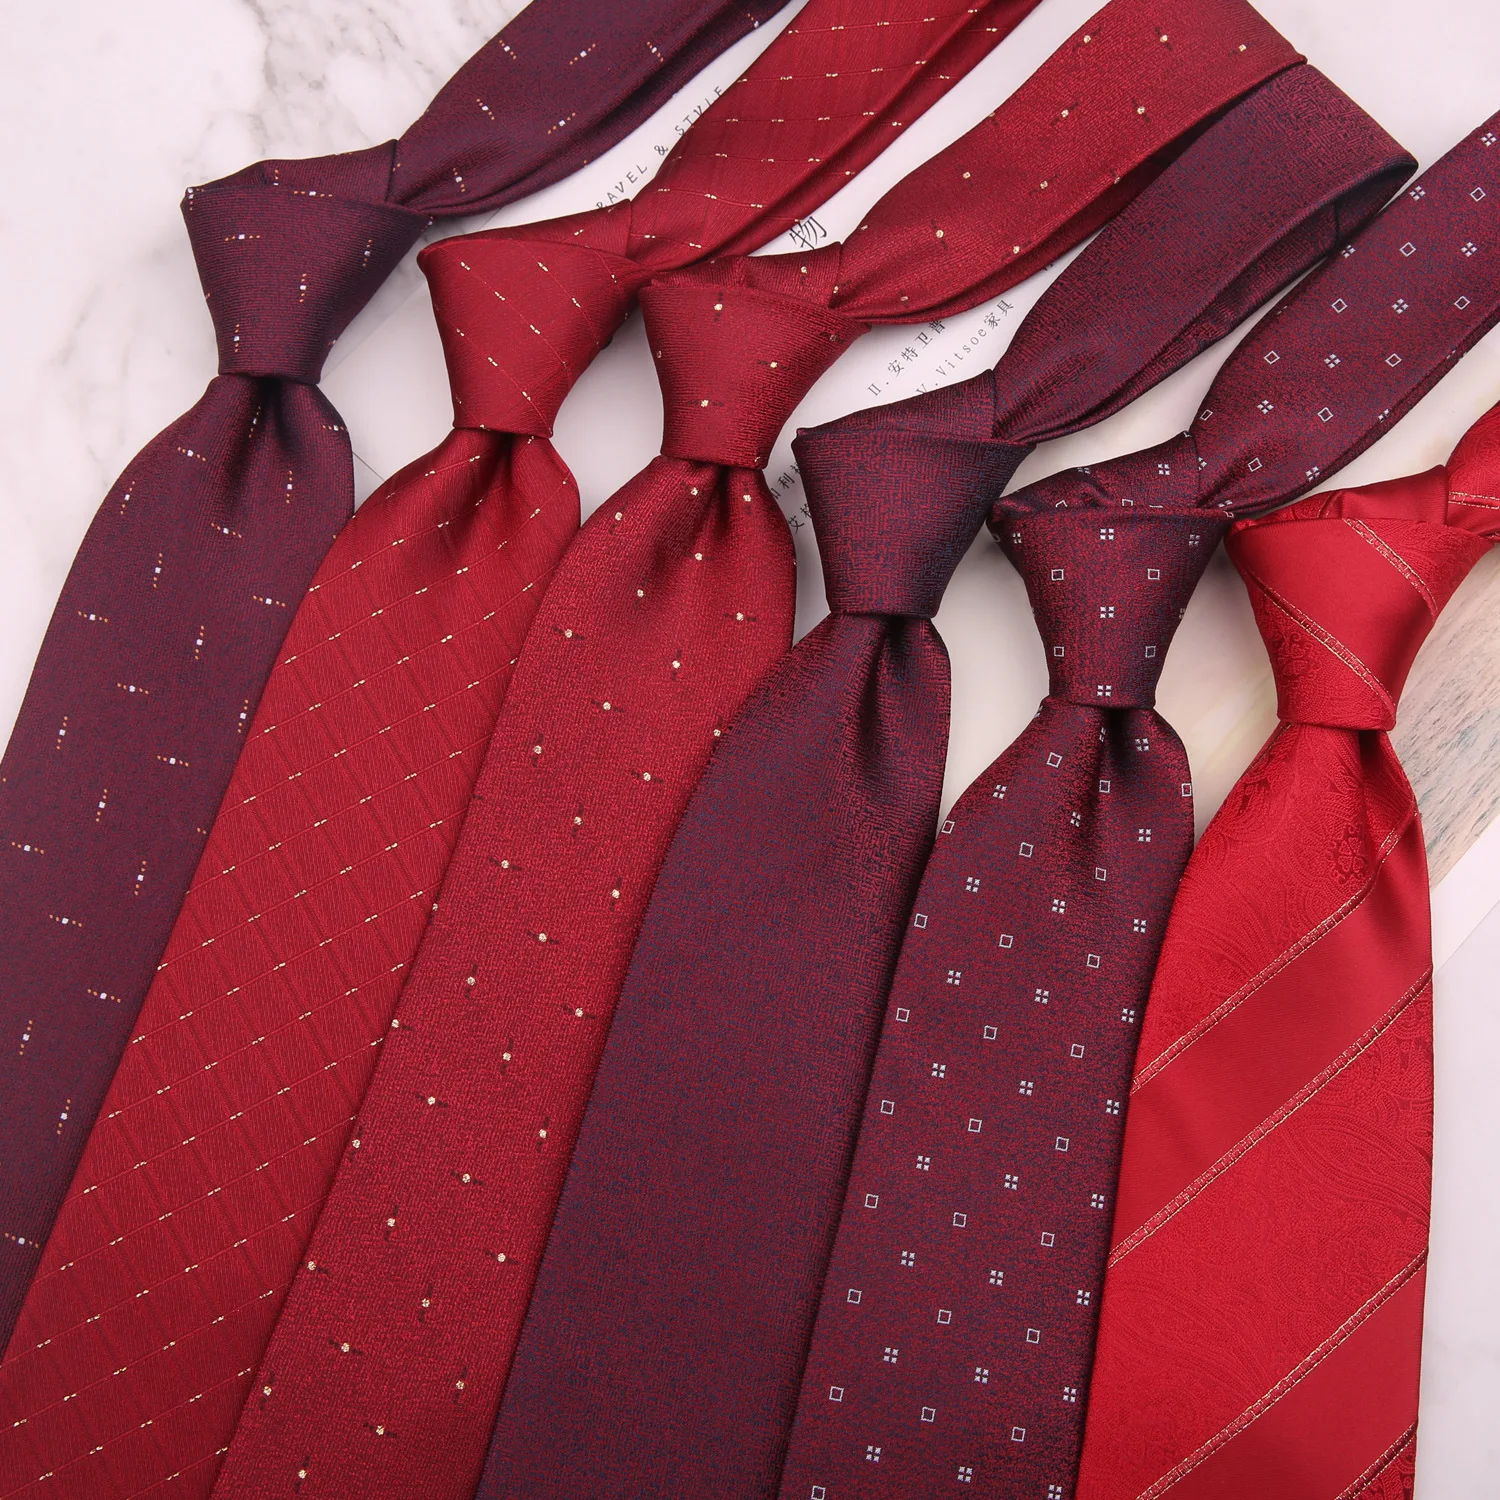 

8CM Red Solid Color Dot Striped Polyester Self-tied Tie Lazy Zipper Necktie for Man Groom Groomsman Wedding Accessories